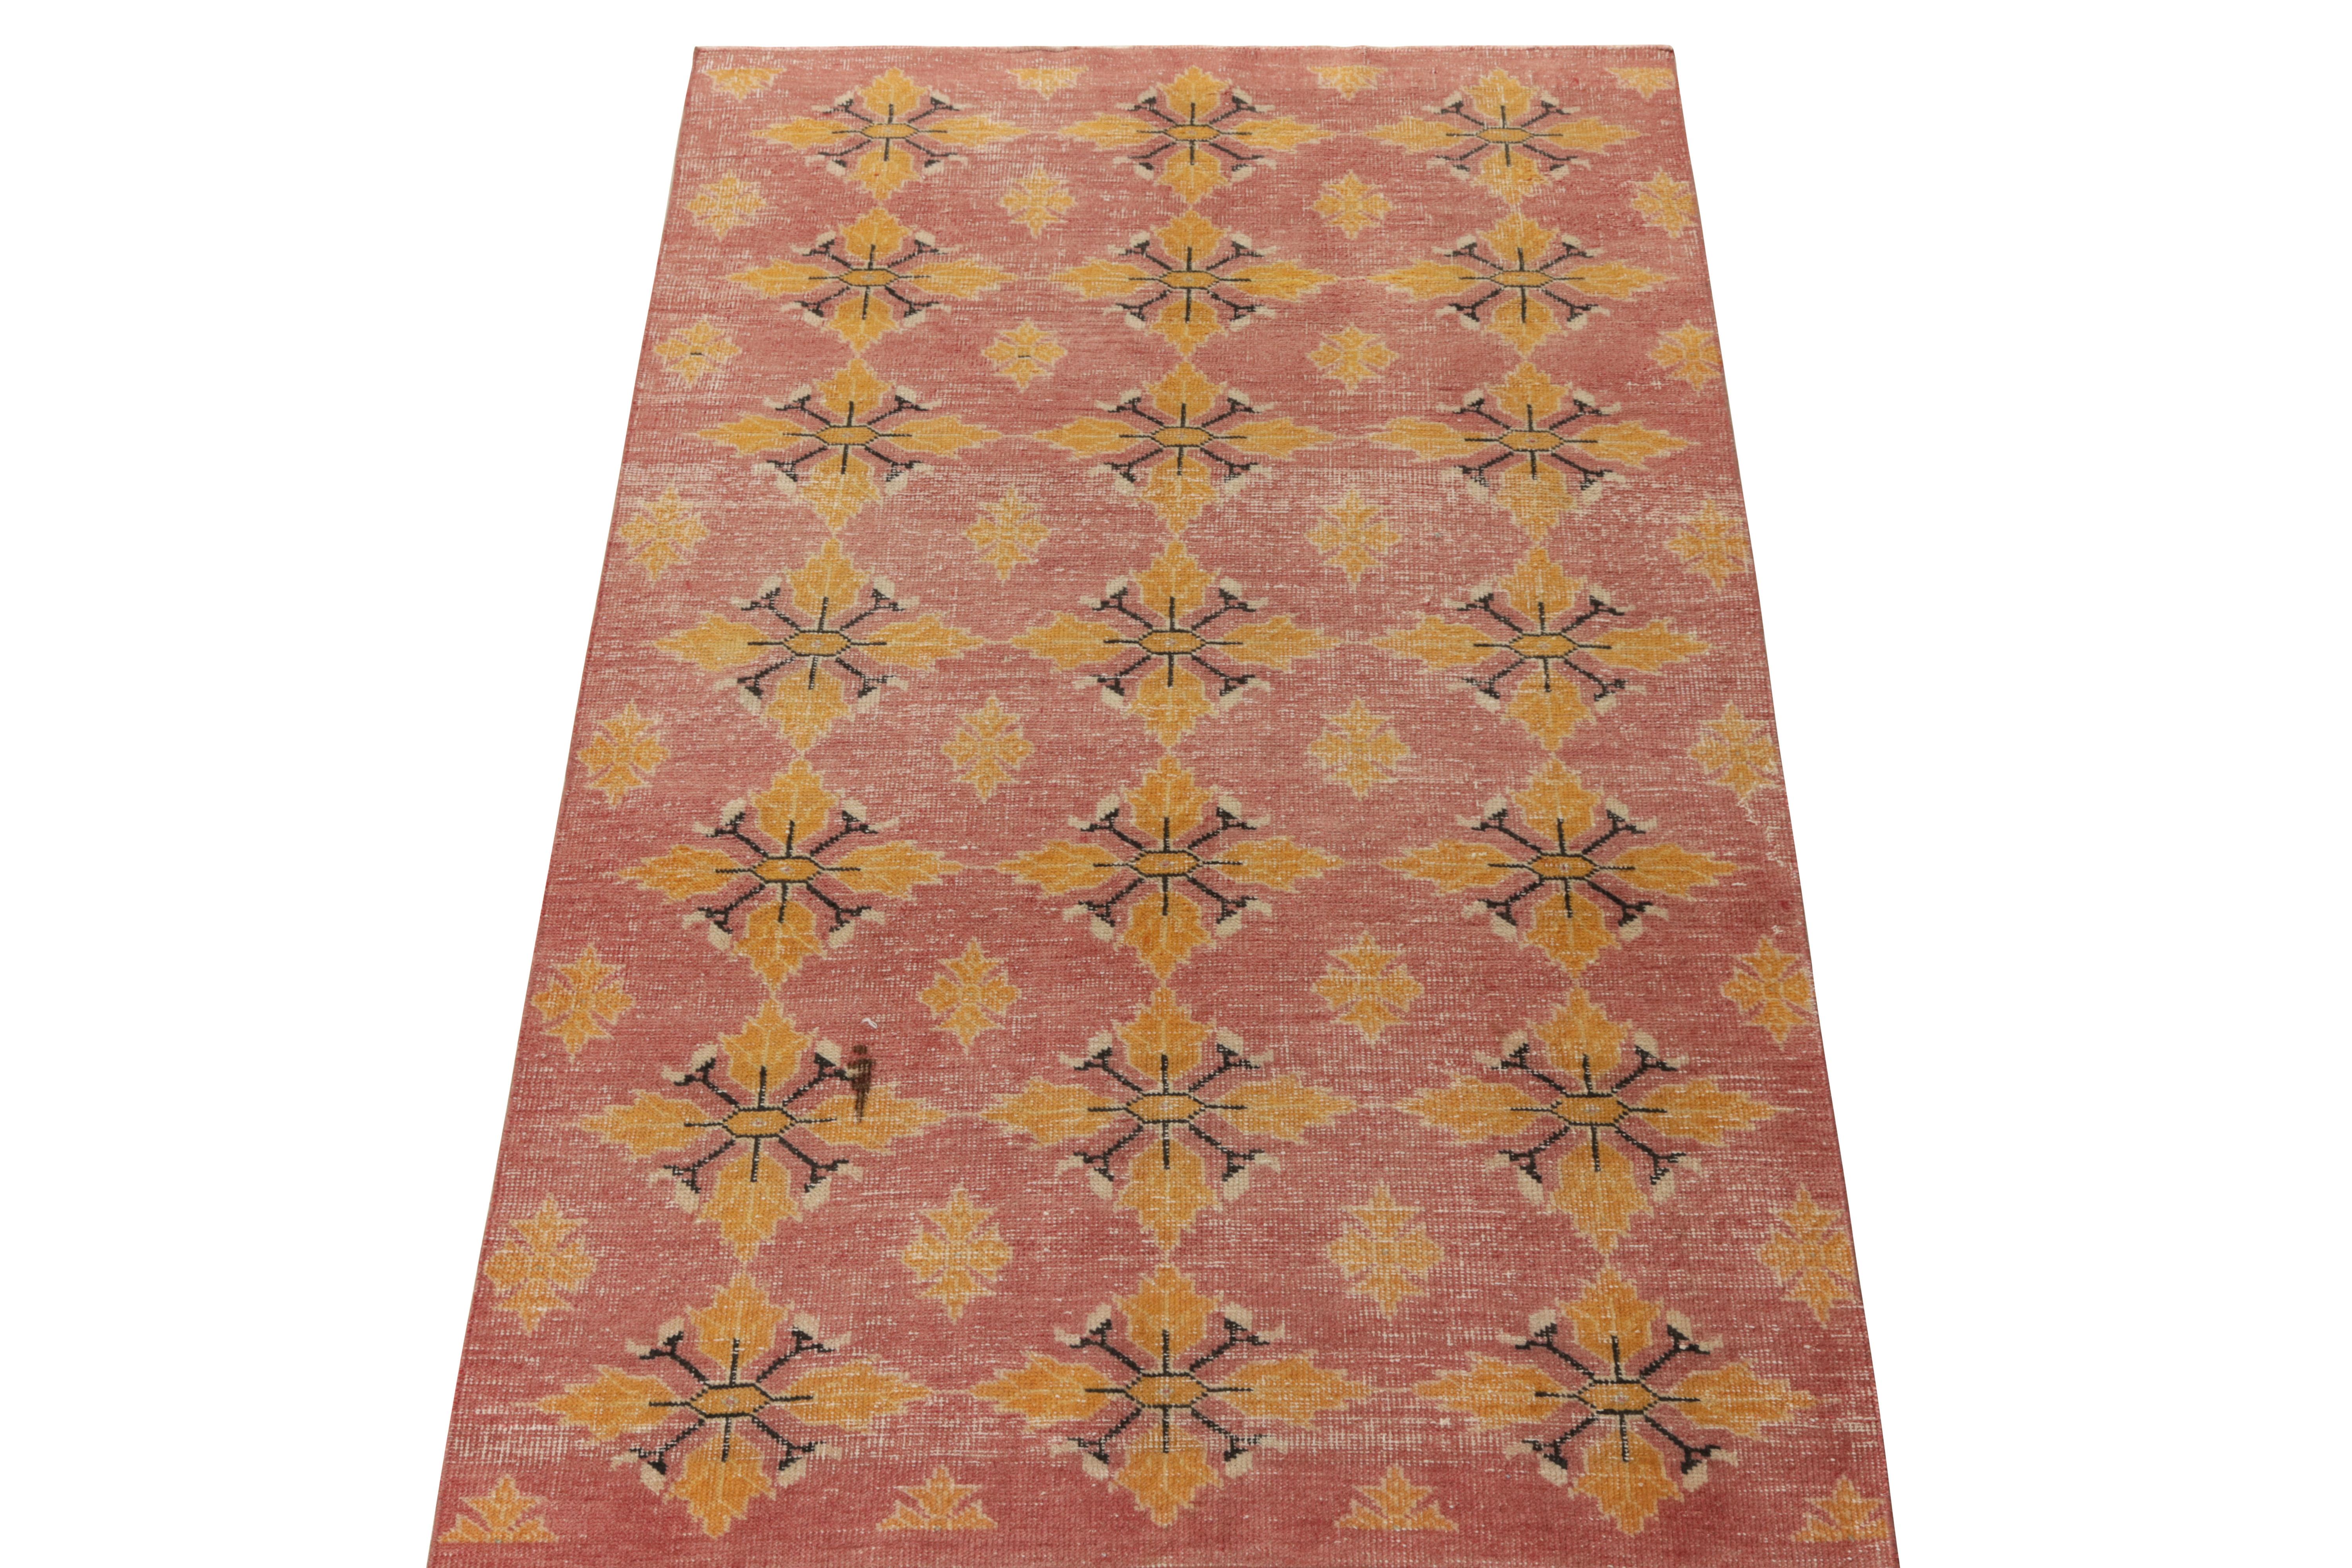 Hand-knotted in wool, a 4x8 distressed style vintage rug from the celebrated artist Zeki Muren—the latest to join Rug & Kilim’s commemorative Mid-Century Pasha collection. The piece finds its value in a refined diamond floral pattern in pink and